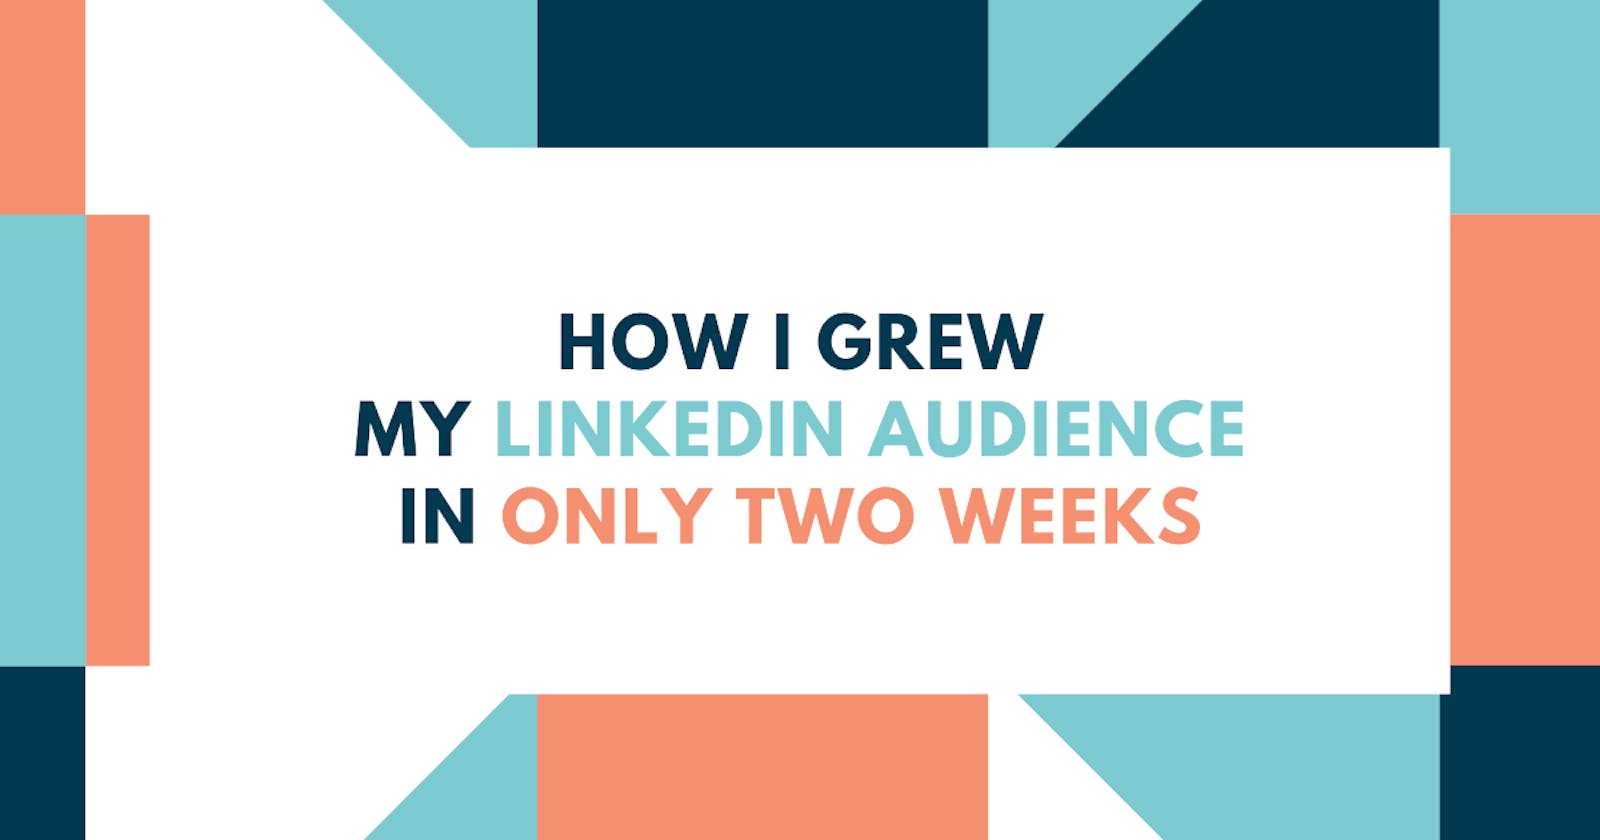 How I Grew My LinkedIn Audience in Only Two Weeks